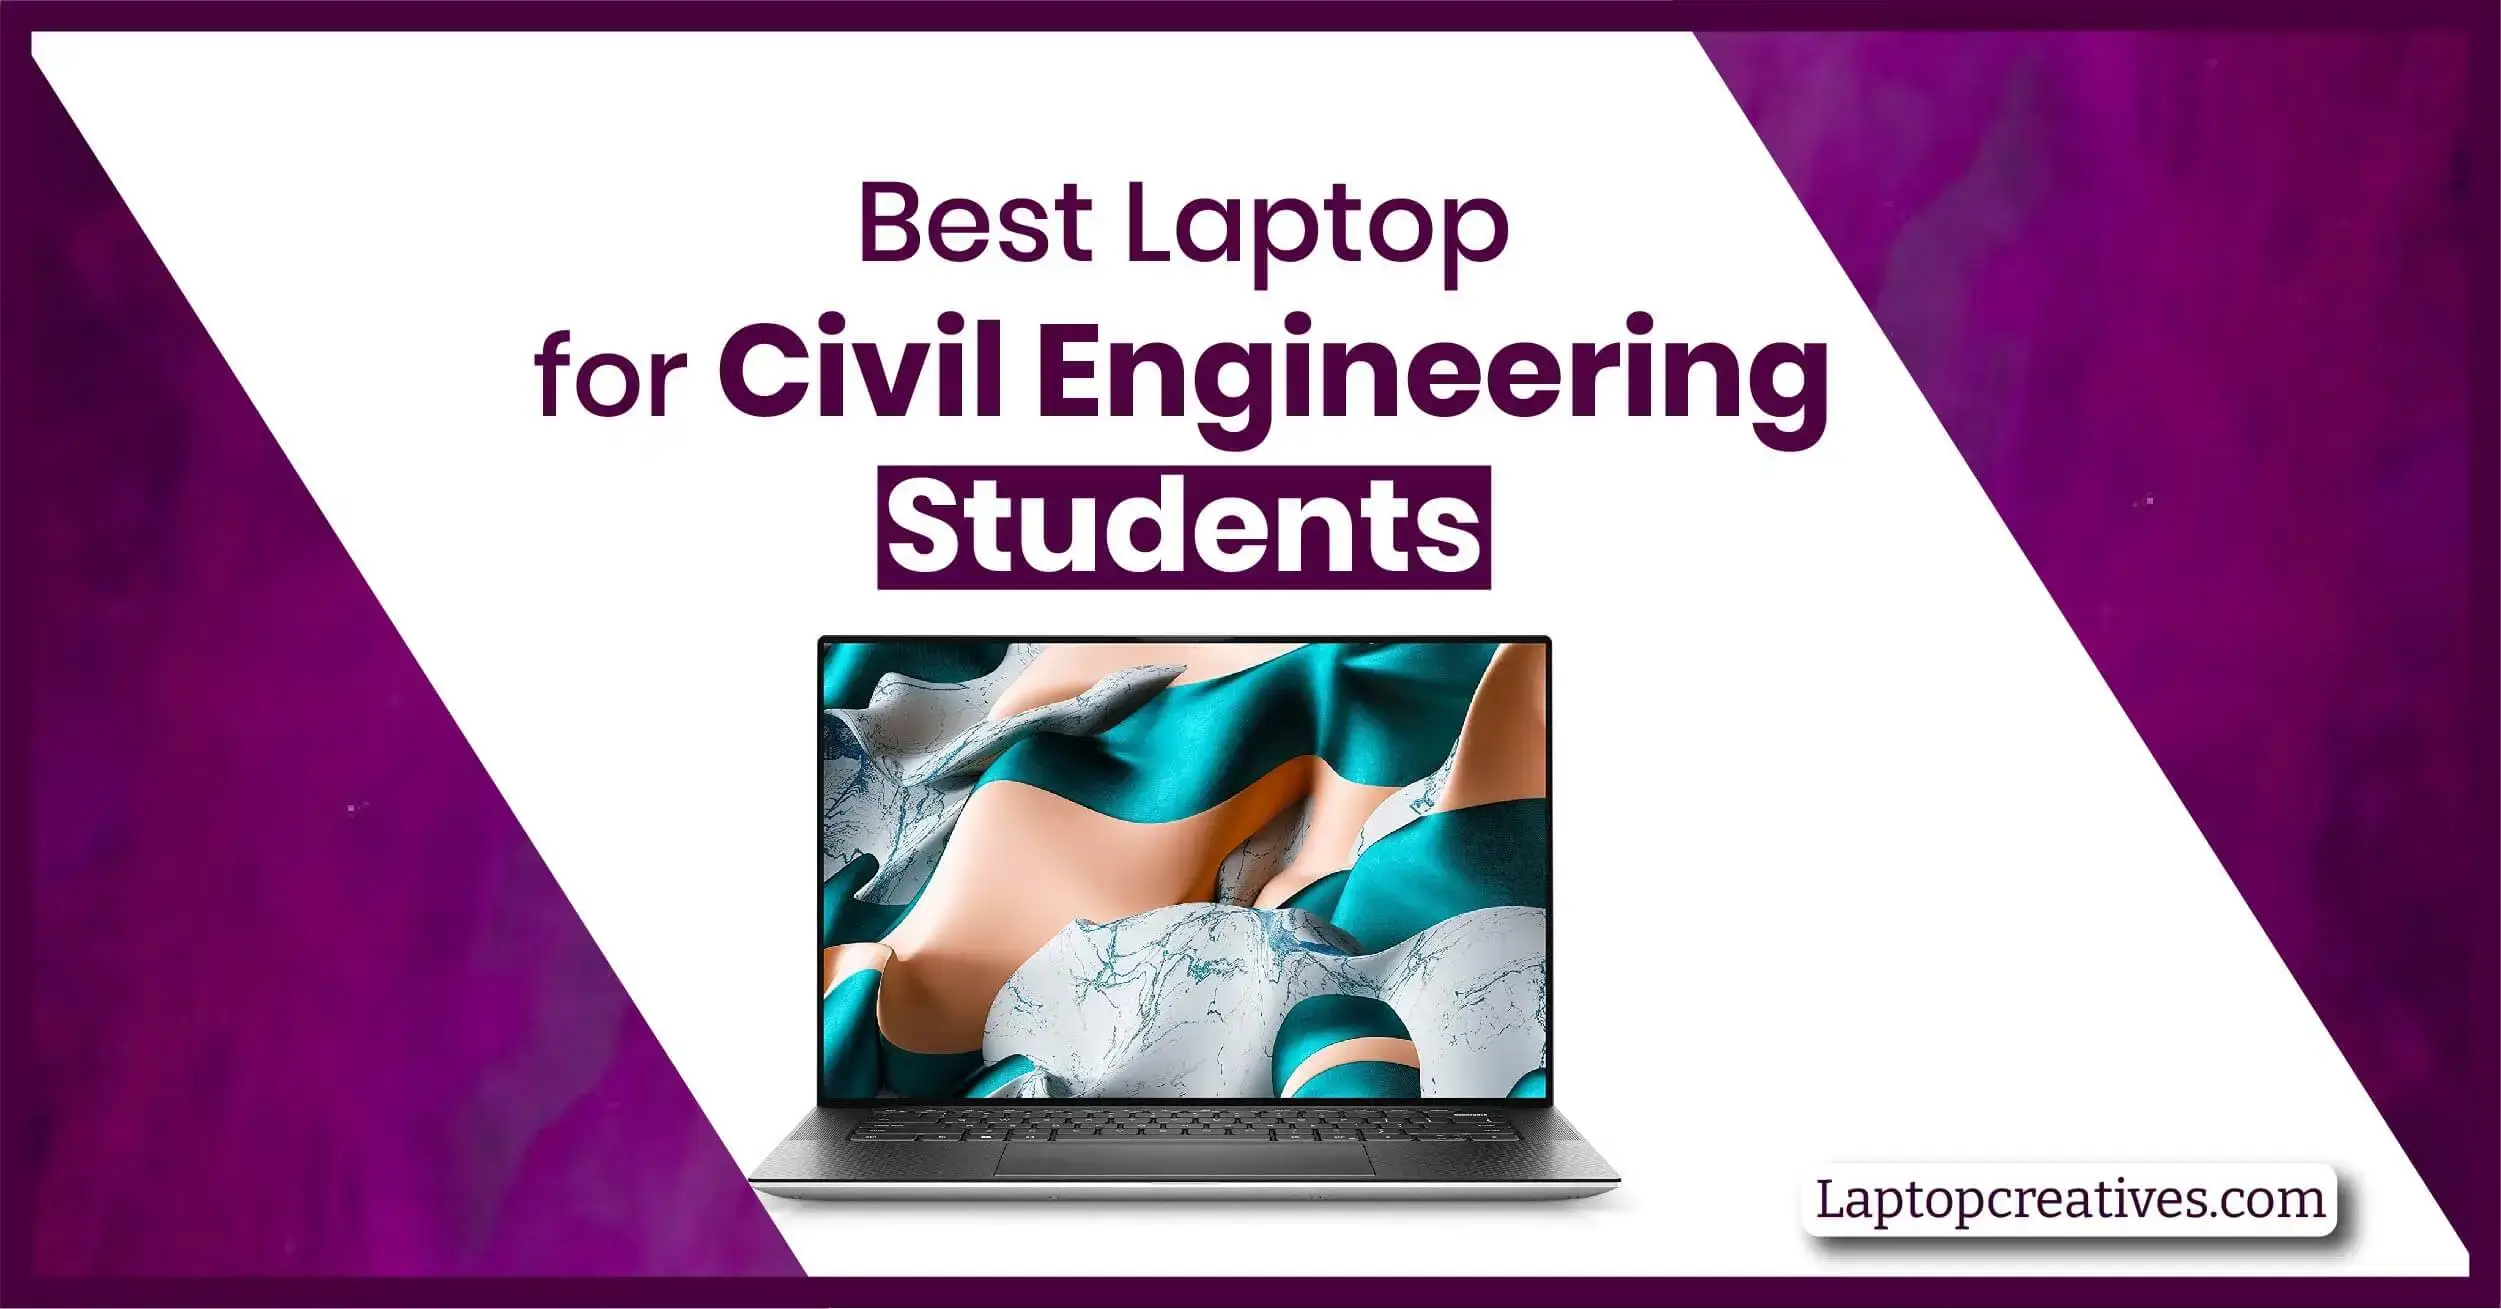 Best Laptop for Civil Engineering Students